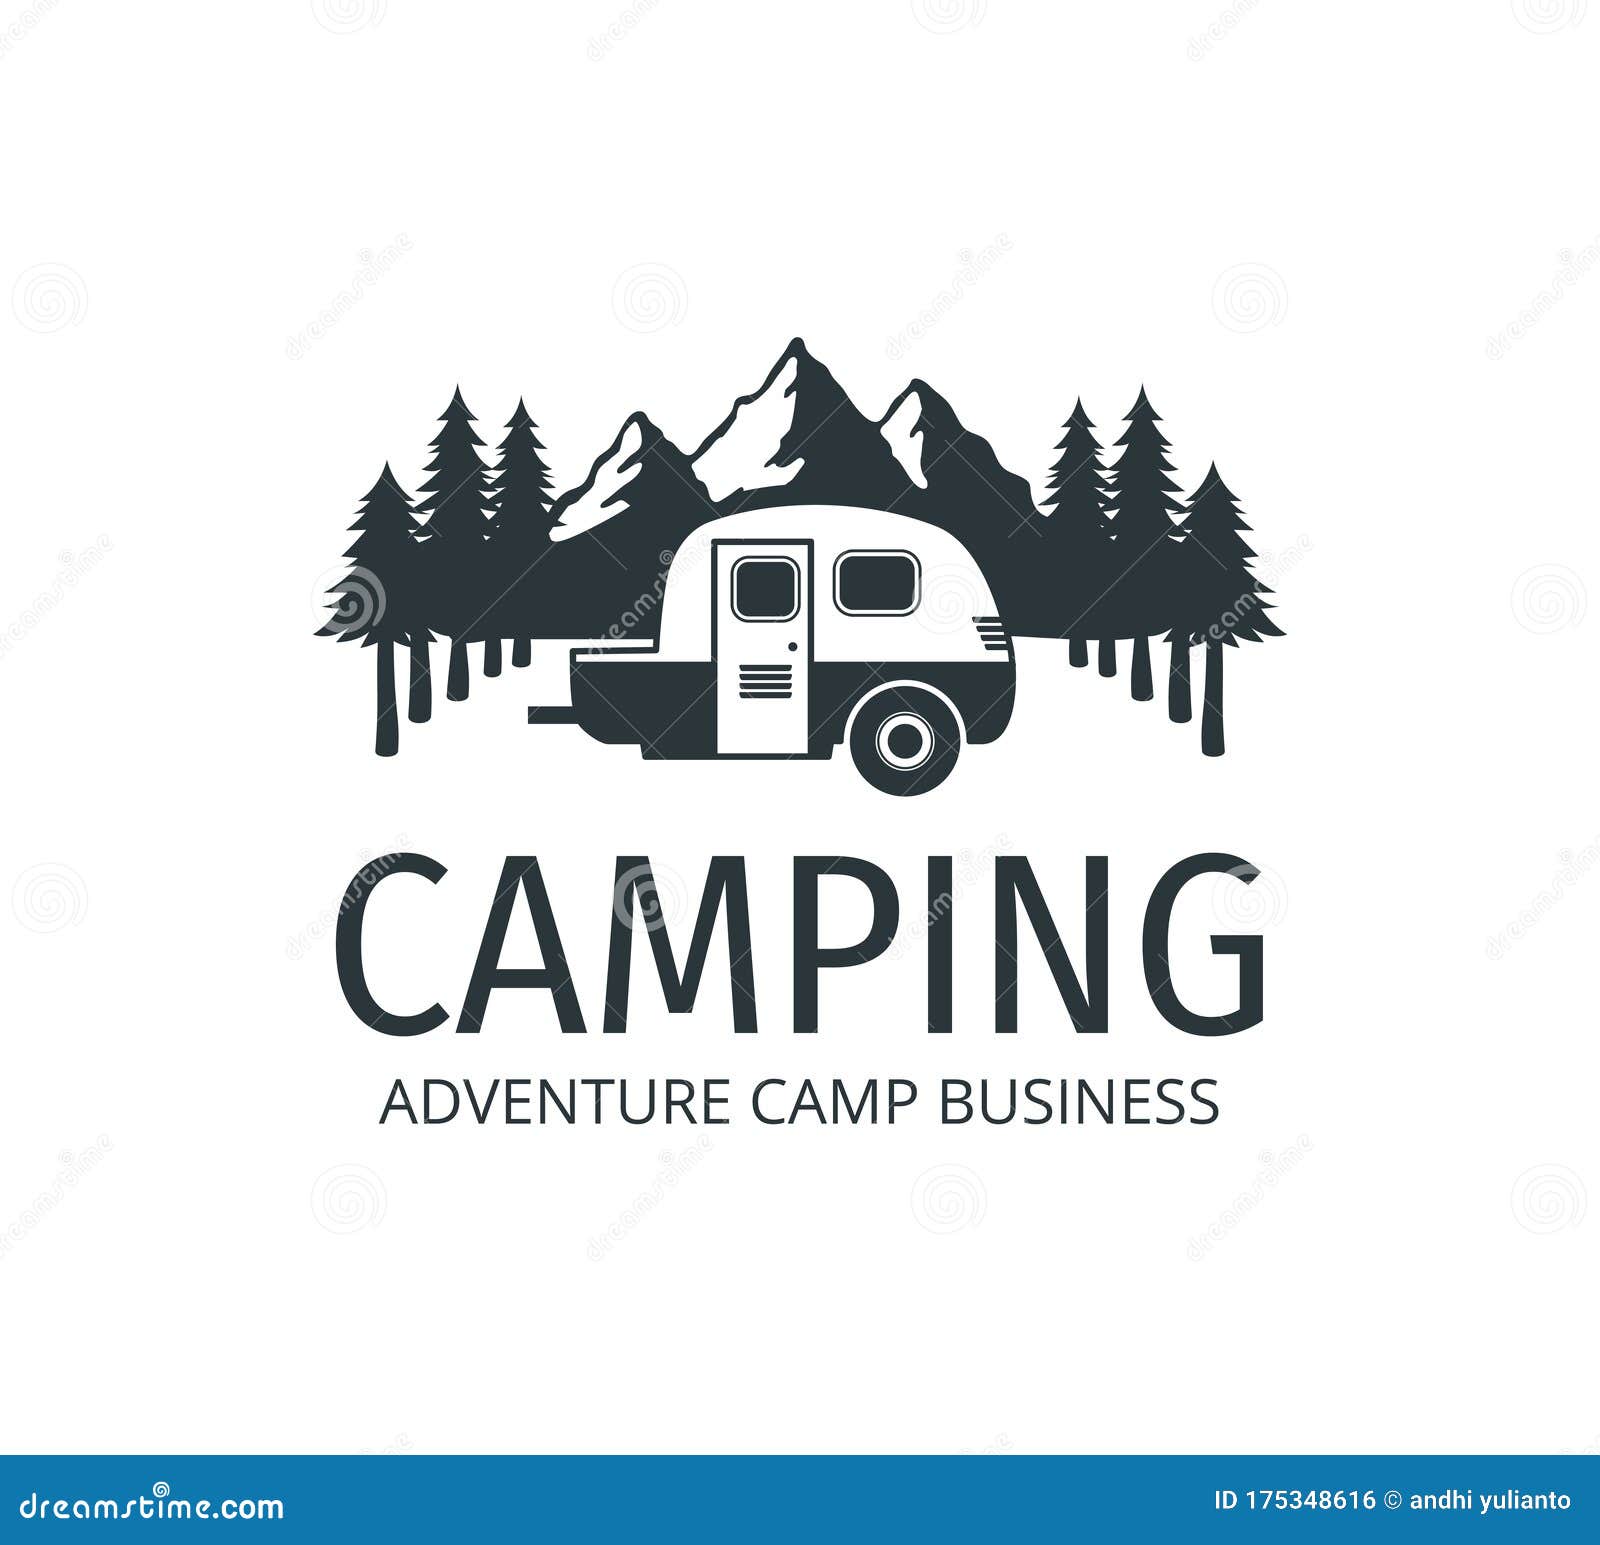 Camping Car Trailer in the Middle of Jungle of Pine Trees for Outdoor ...